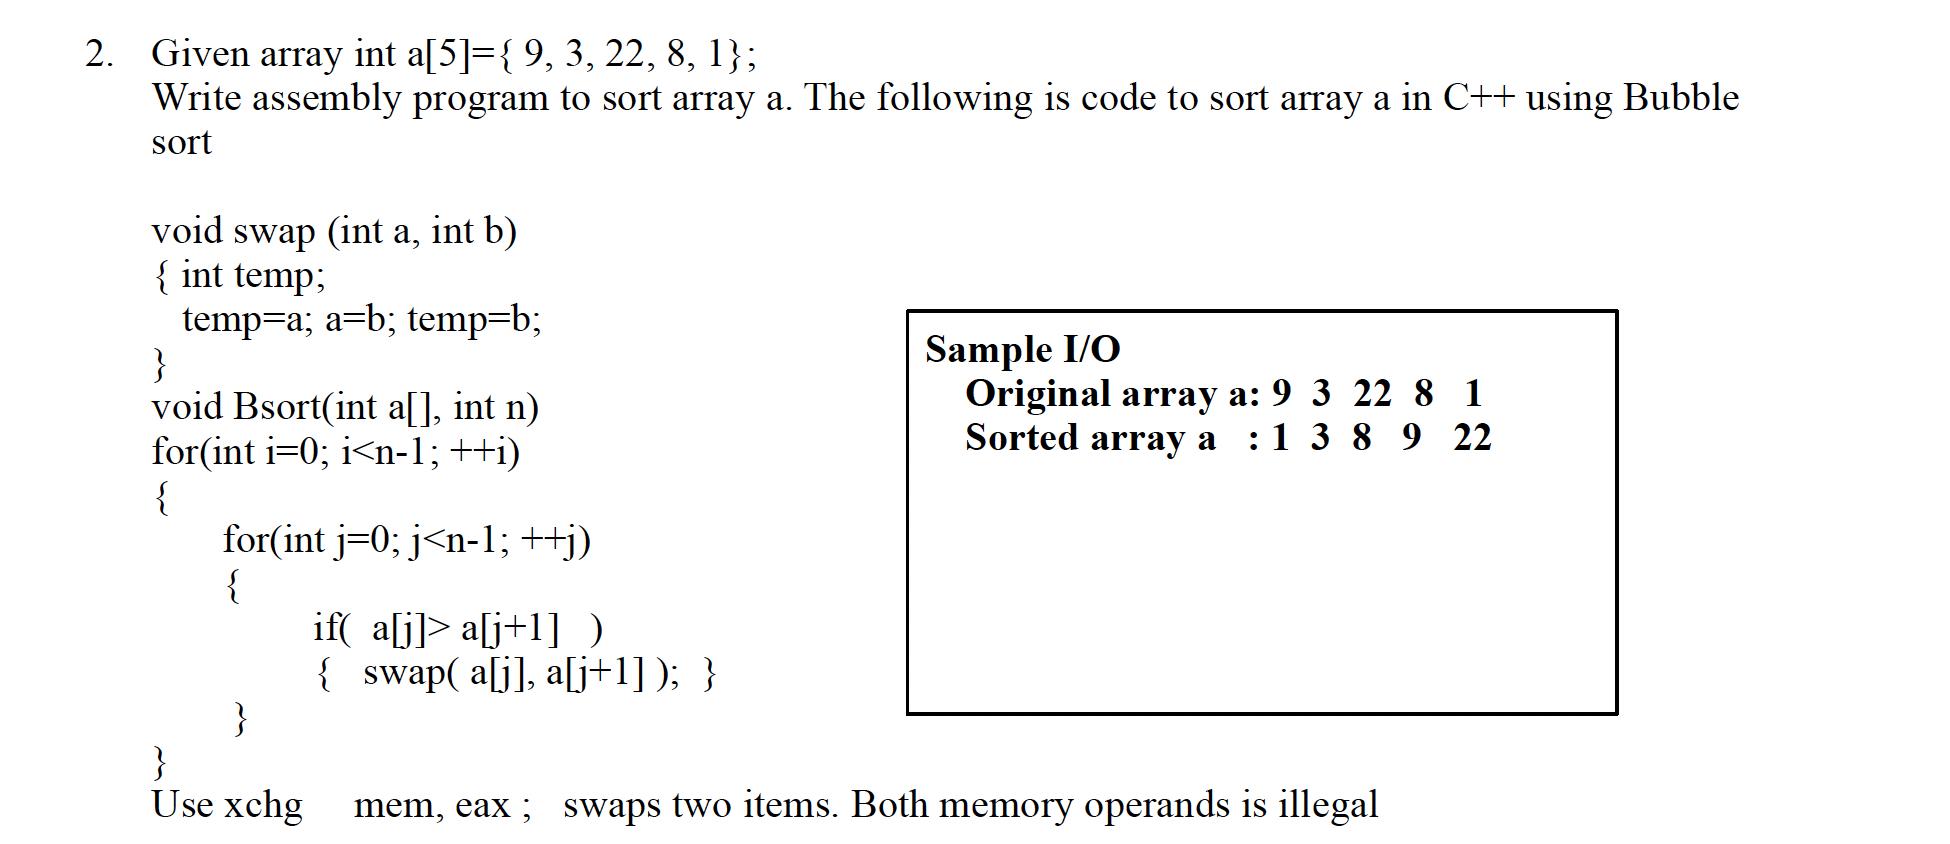 2. Given array int a[5]={ 9, 3, 22, 8, 1}; Write assembly program to sort array a. The following is code to